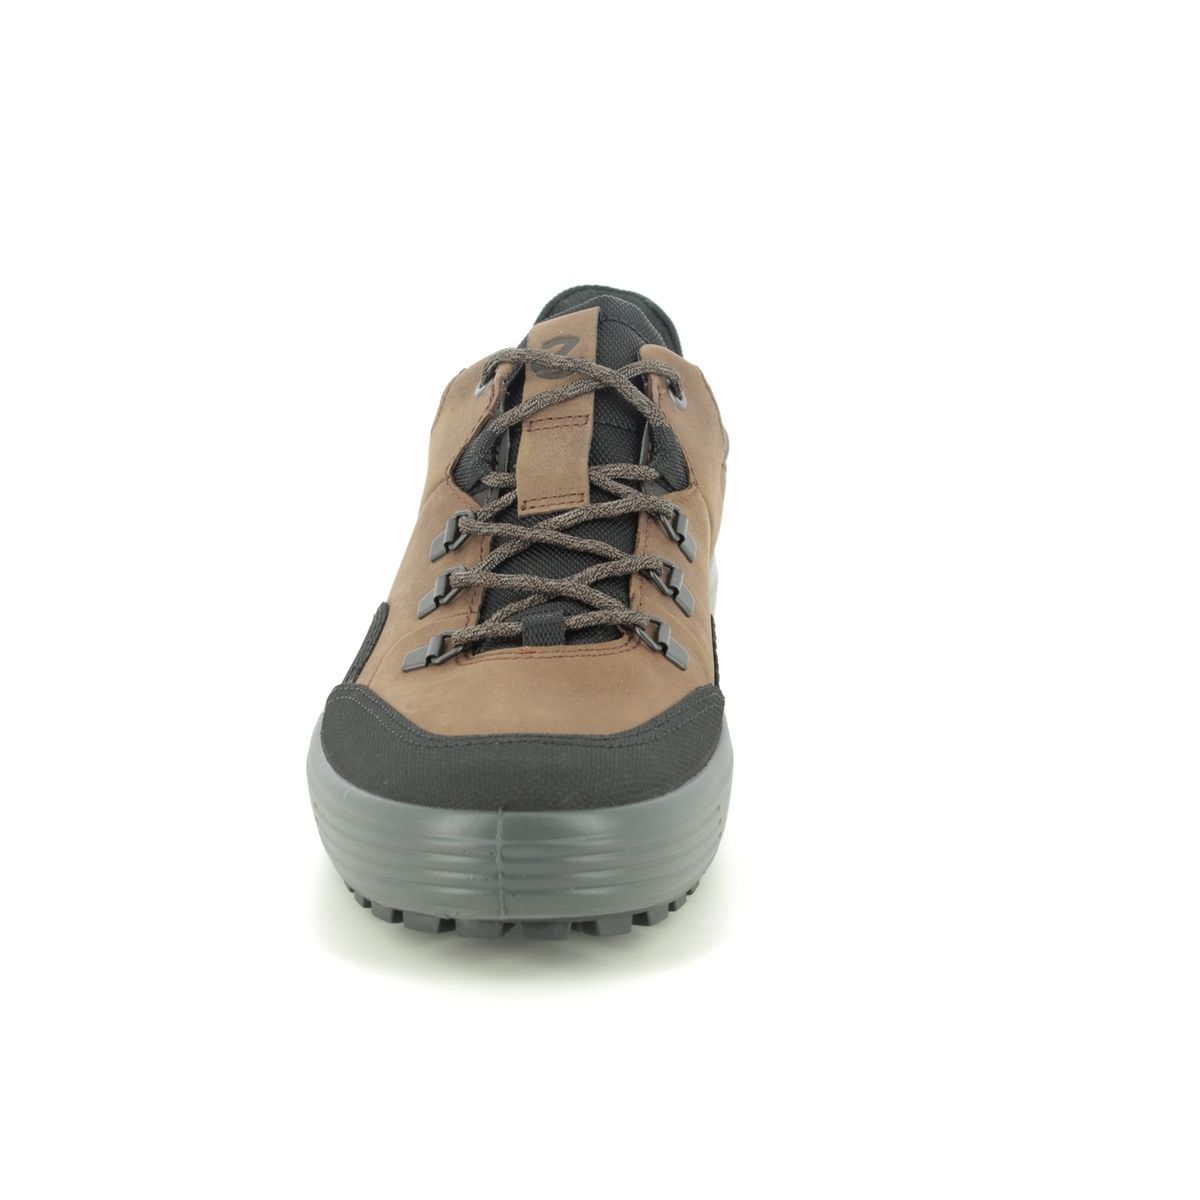 ECCO Soft 7 Mens Lo Gtx Brown leather Mens Walking Shoes 450354-55275